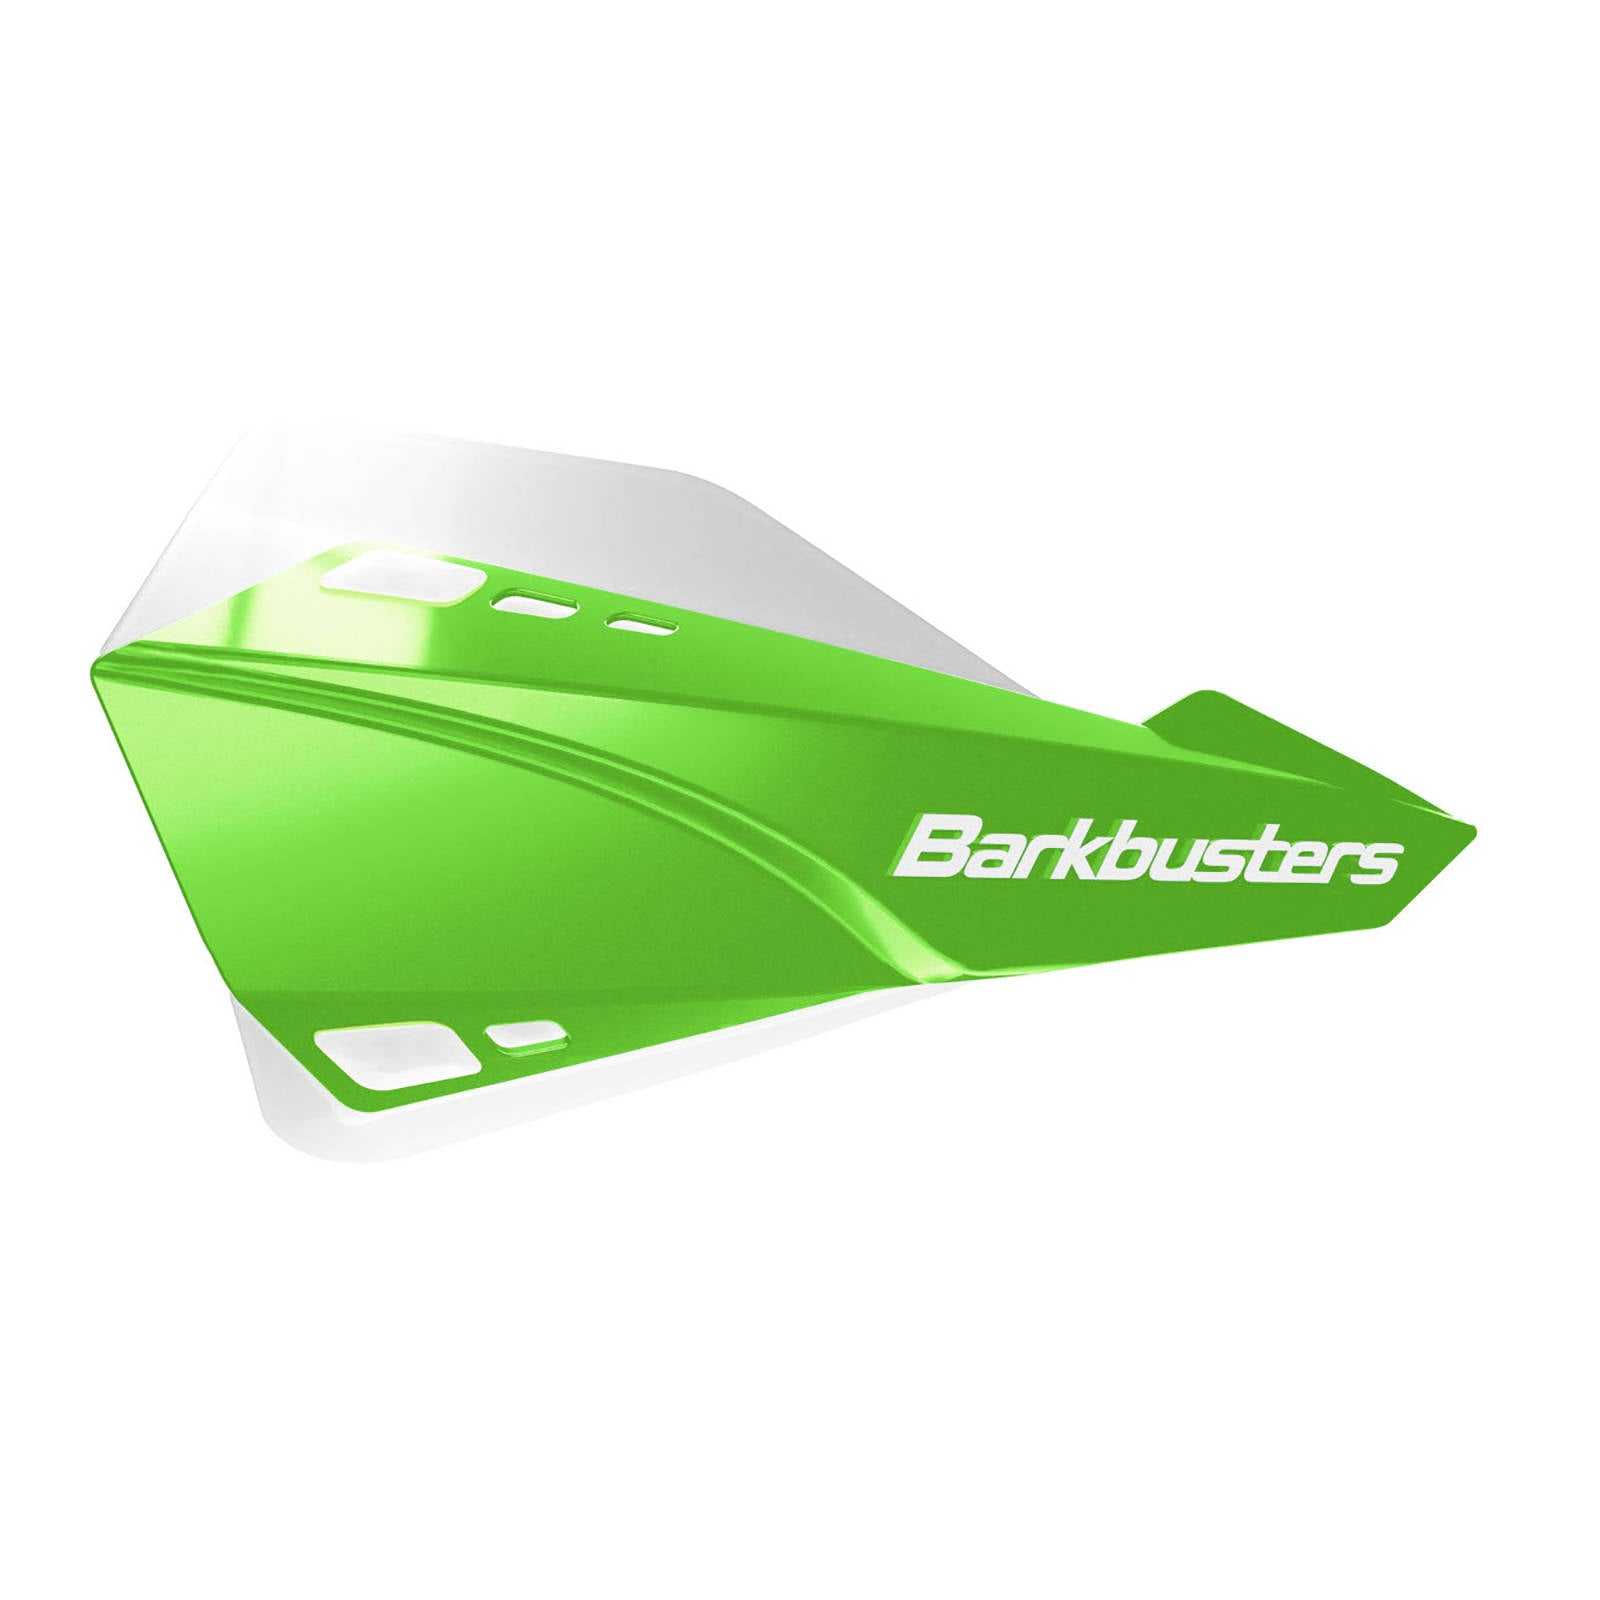 Barkbusters, Barkbusters Handguard Sabre Open - Green / White